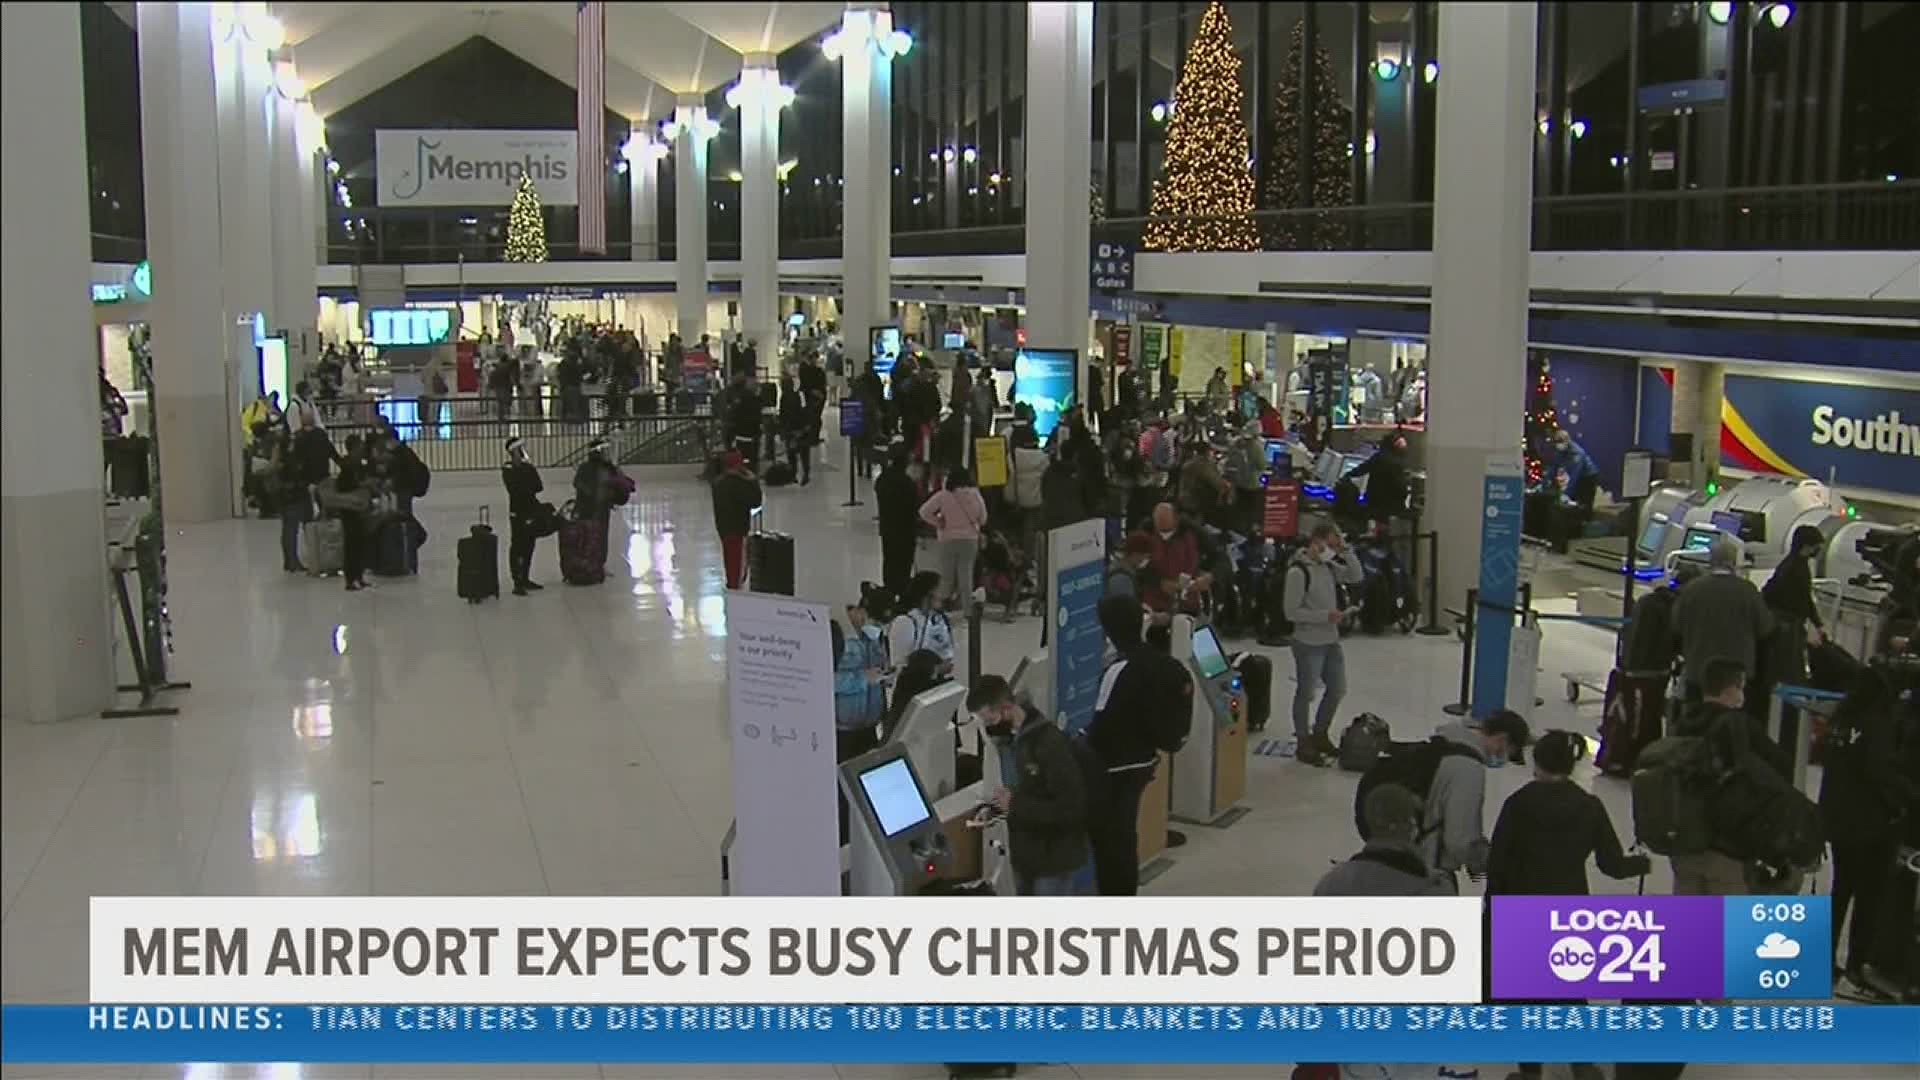 Travel is expected to be up at Memphis International after a national record-breaking weekend during the pandemic.